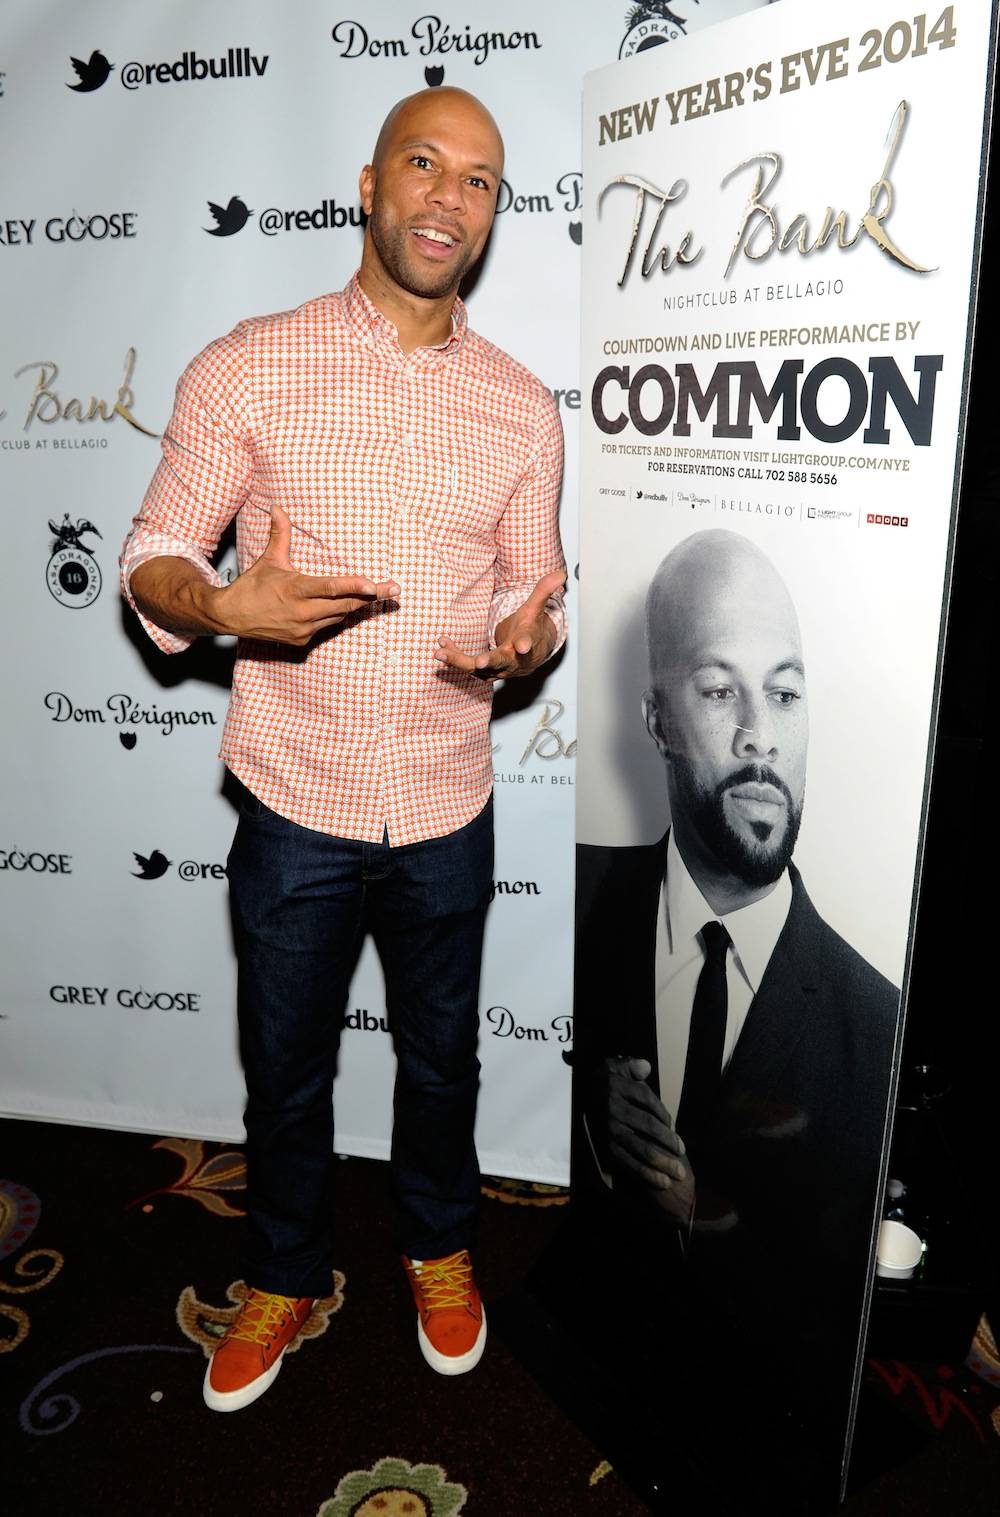 Common Celebrates New Year's Eve At The Bank Nightclub At Bellagio In Las Vegas